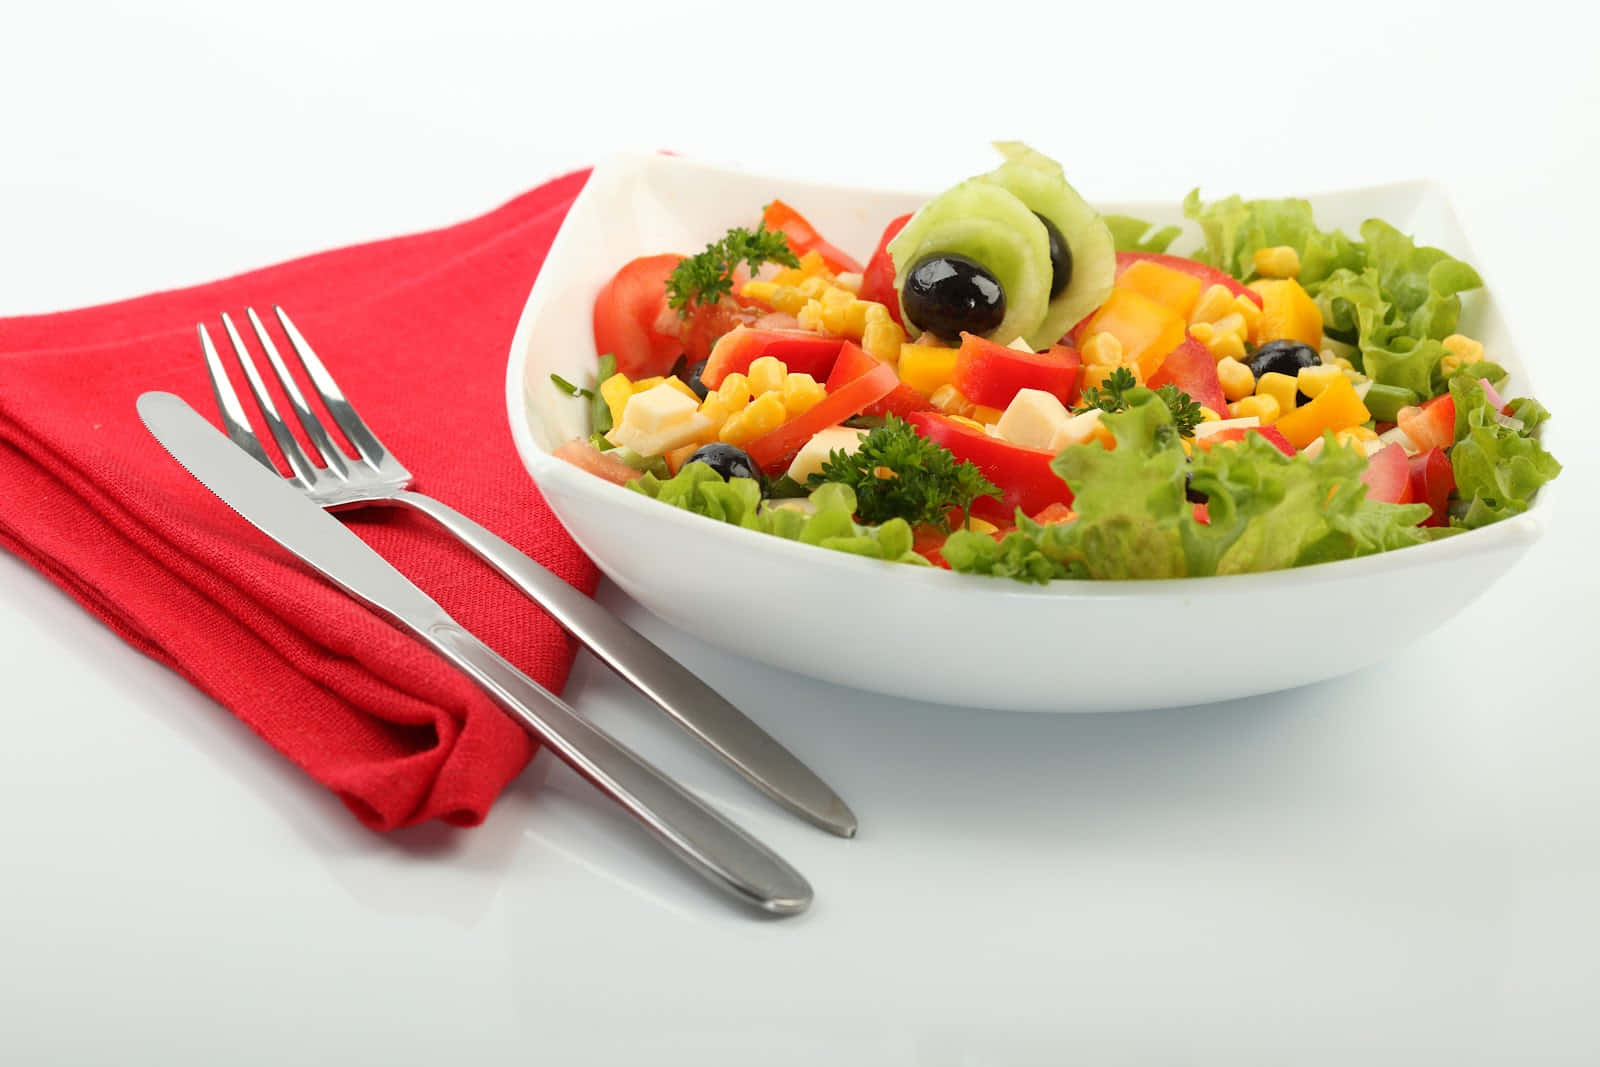 A vibrant and healthy salad bowl with a variety of greens and vegetables.